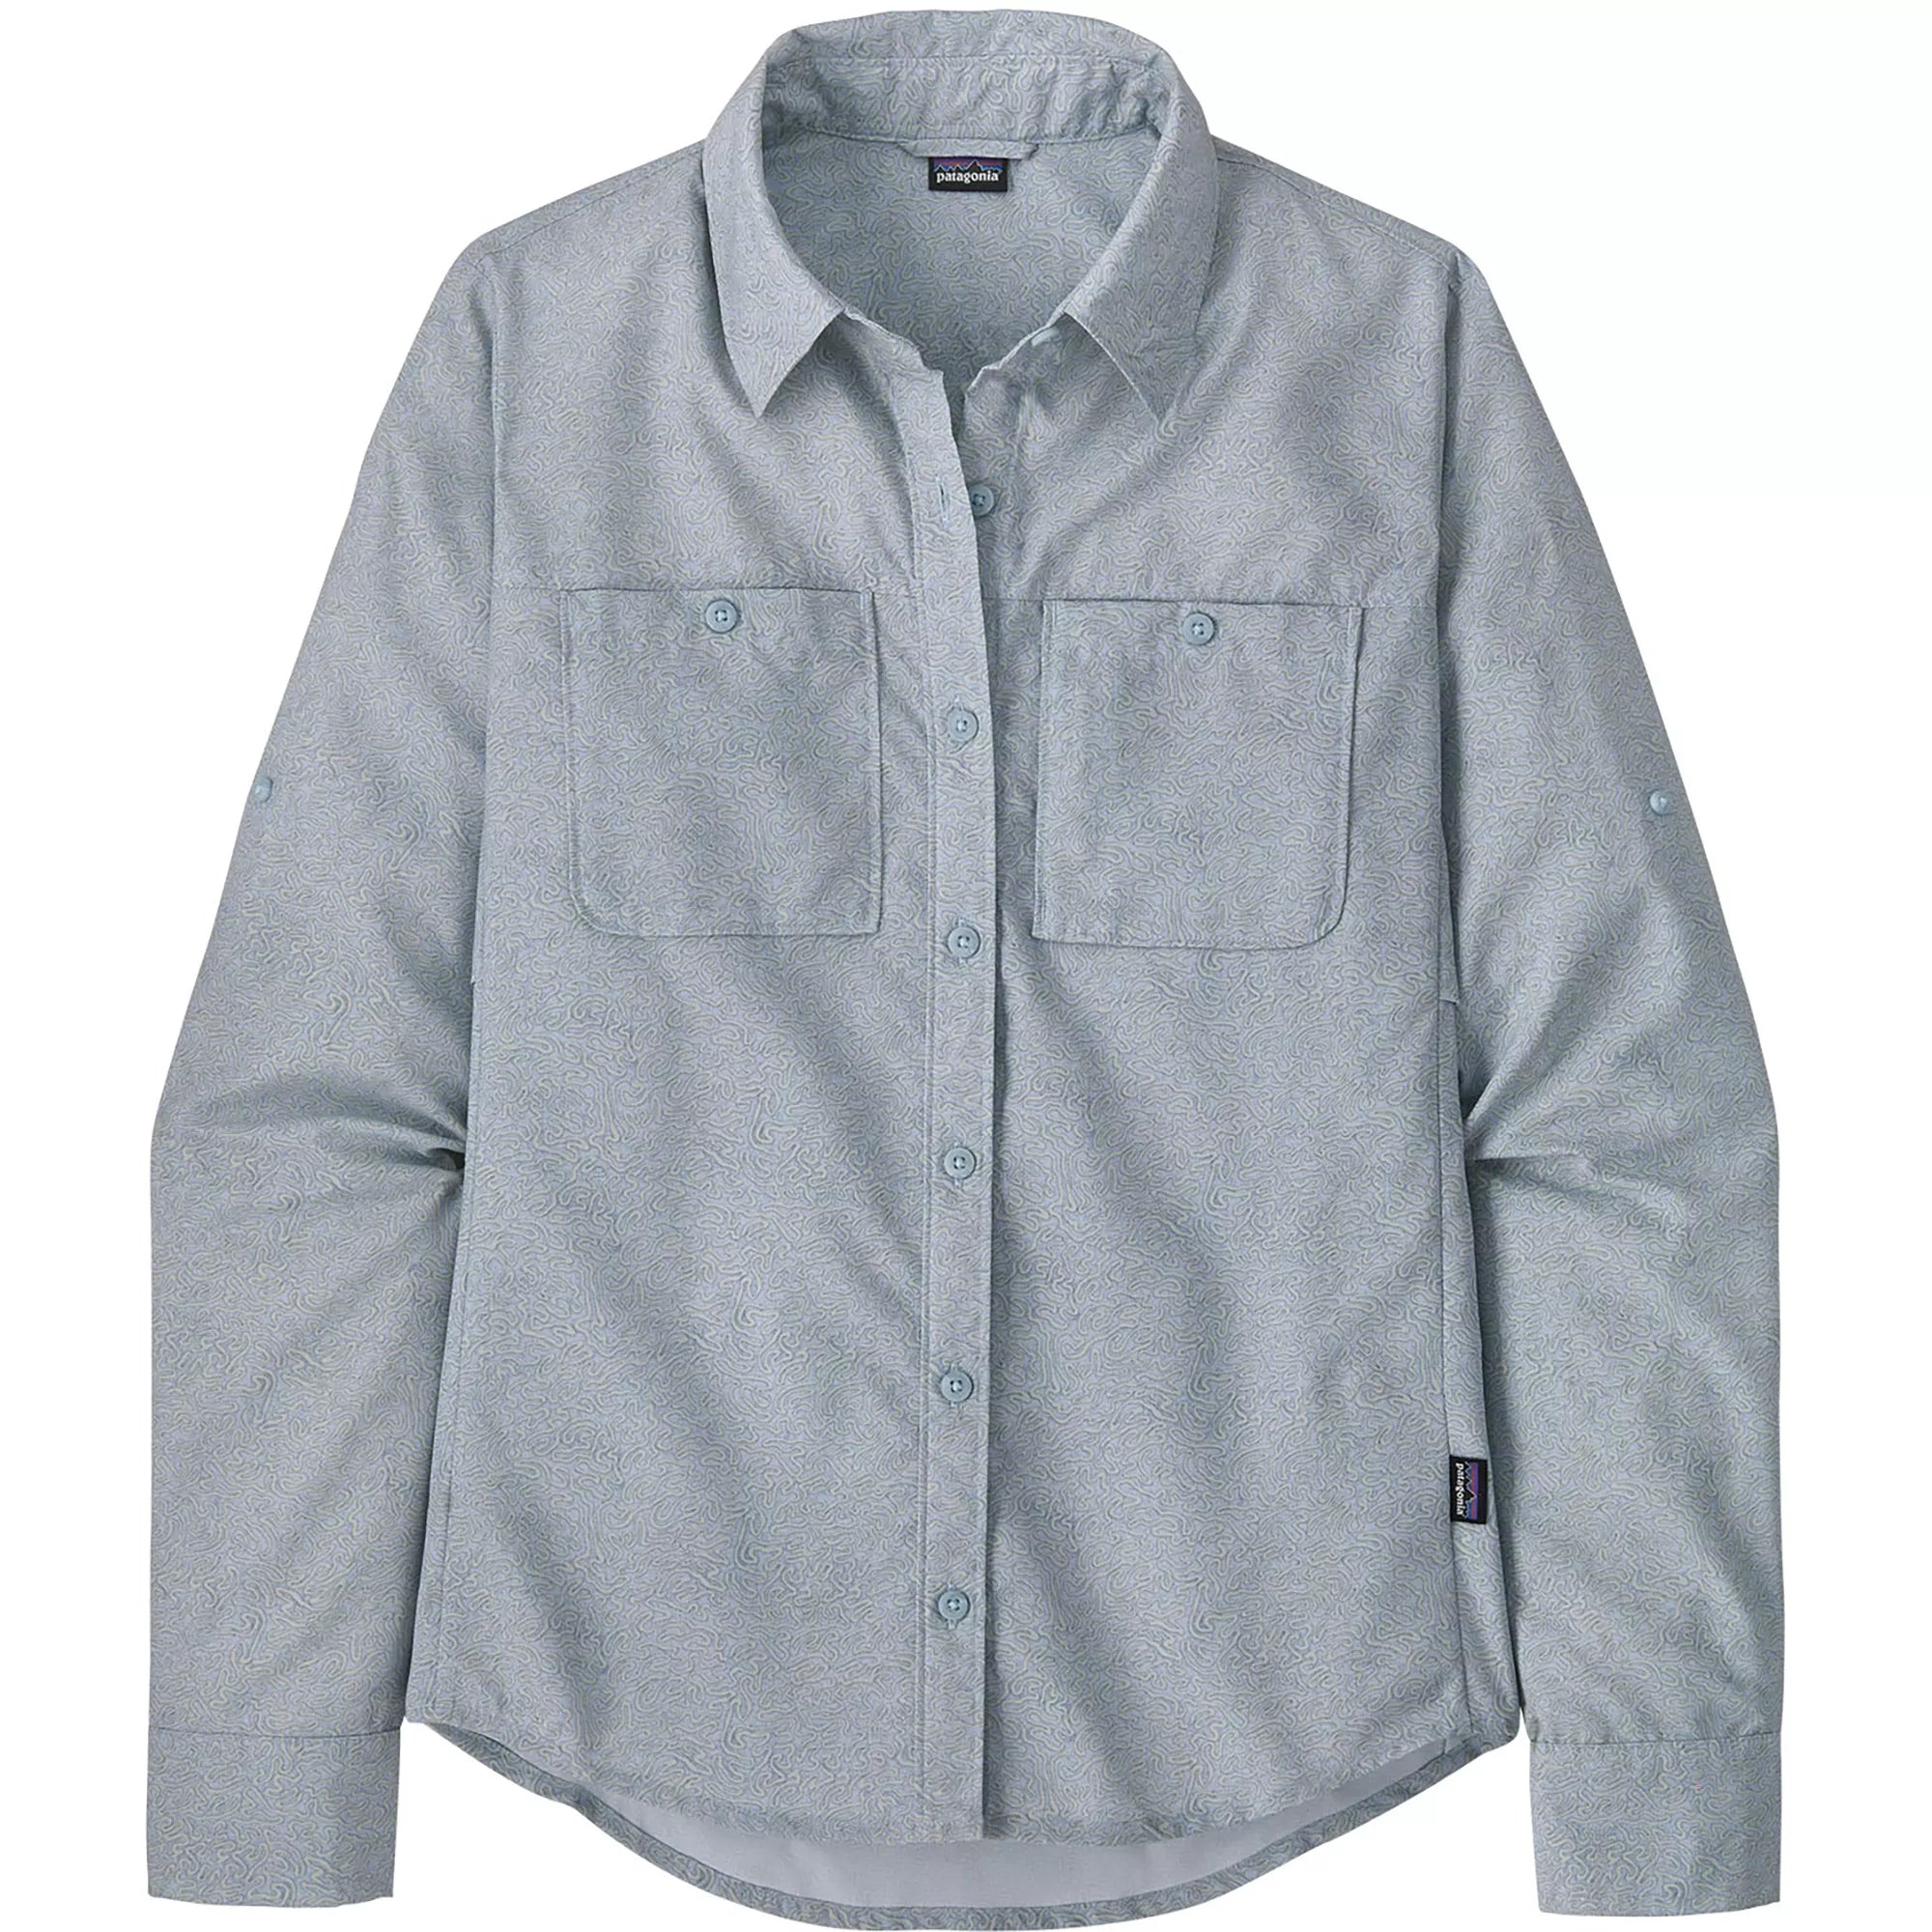 W L/S Self Guided UPF Hike Shirt- Journeys: Steam Blue